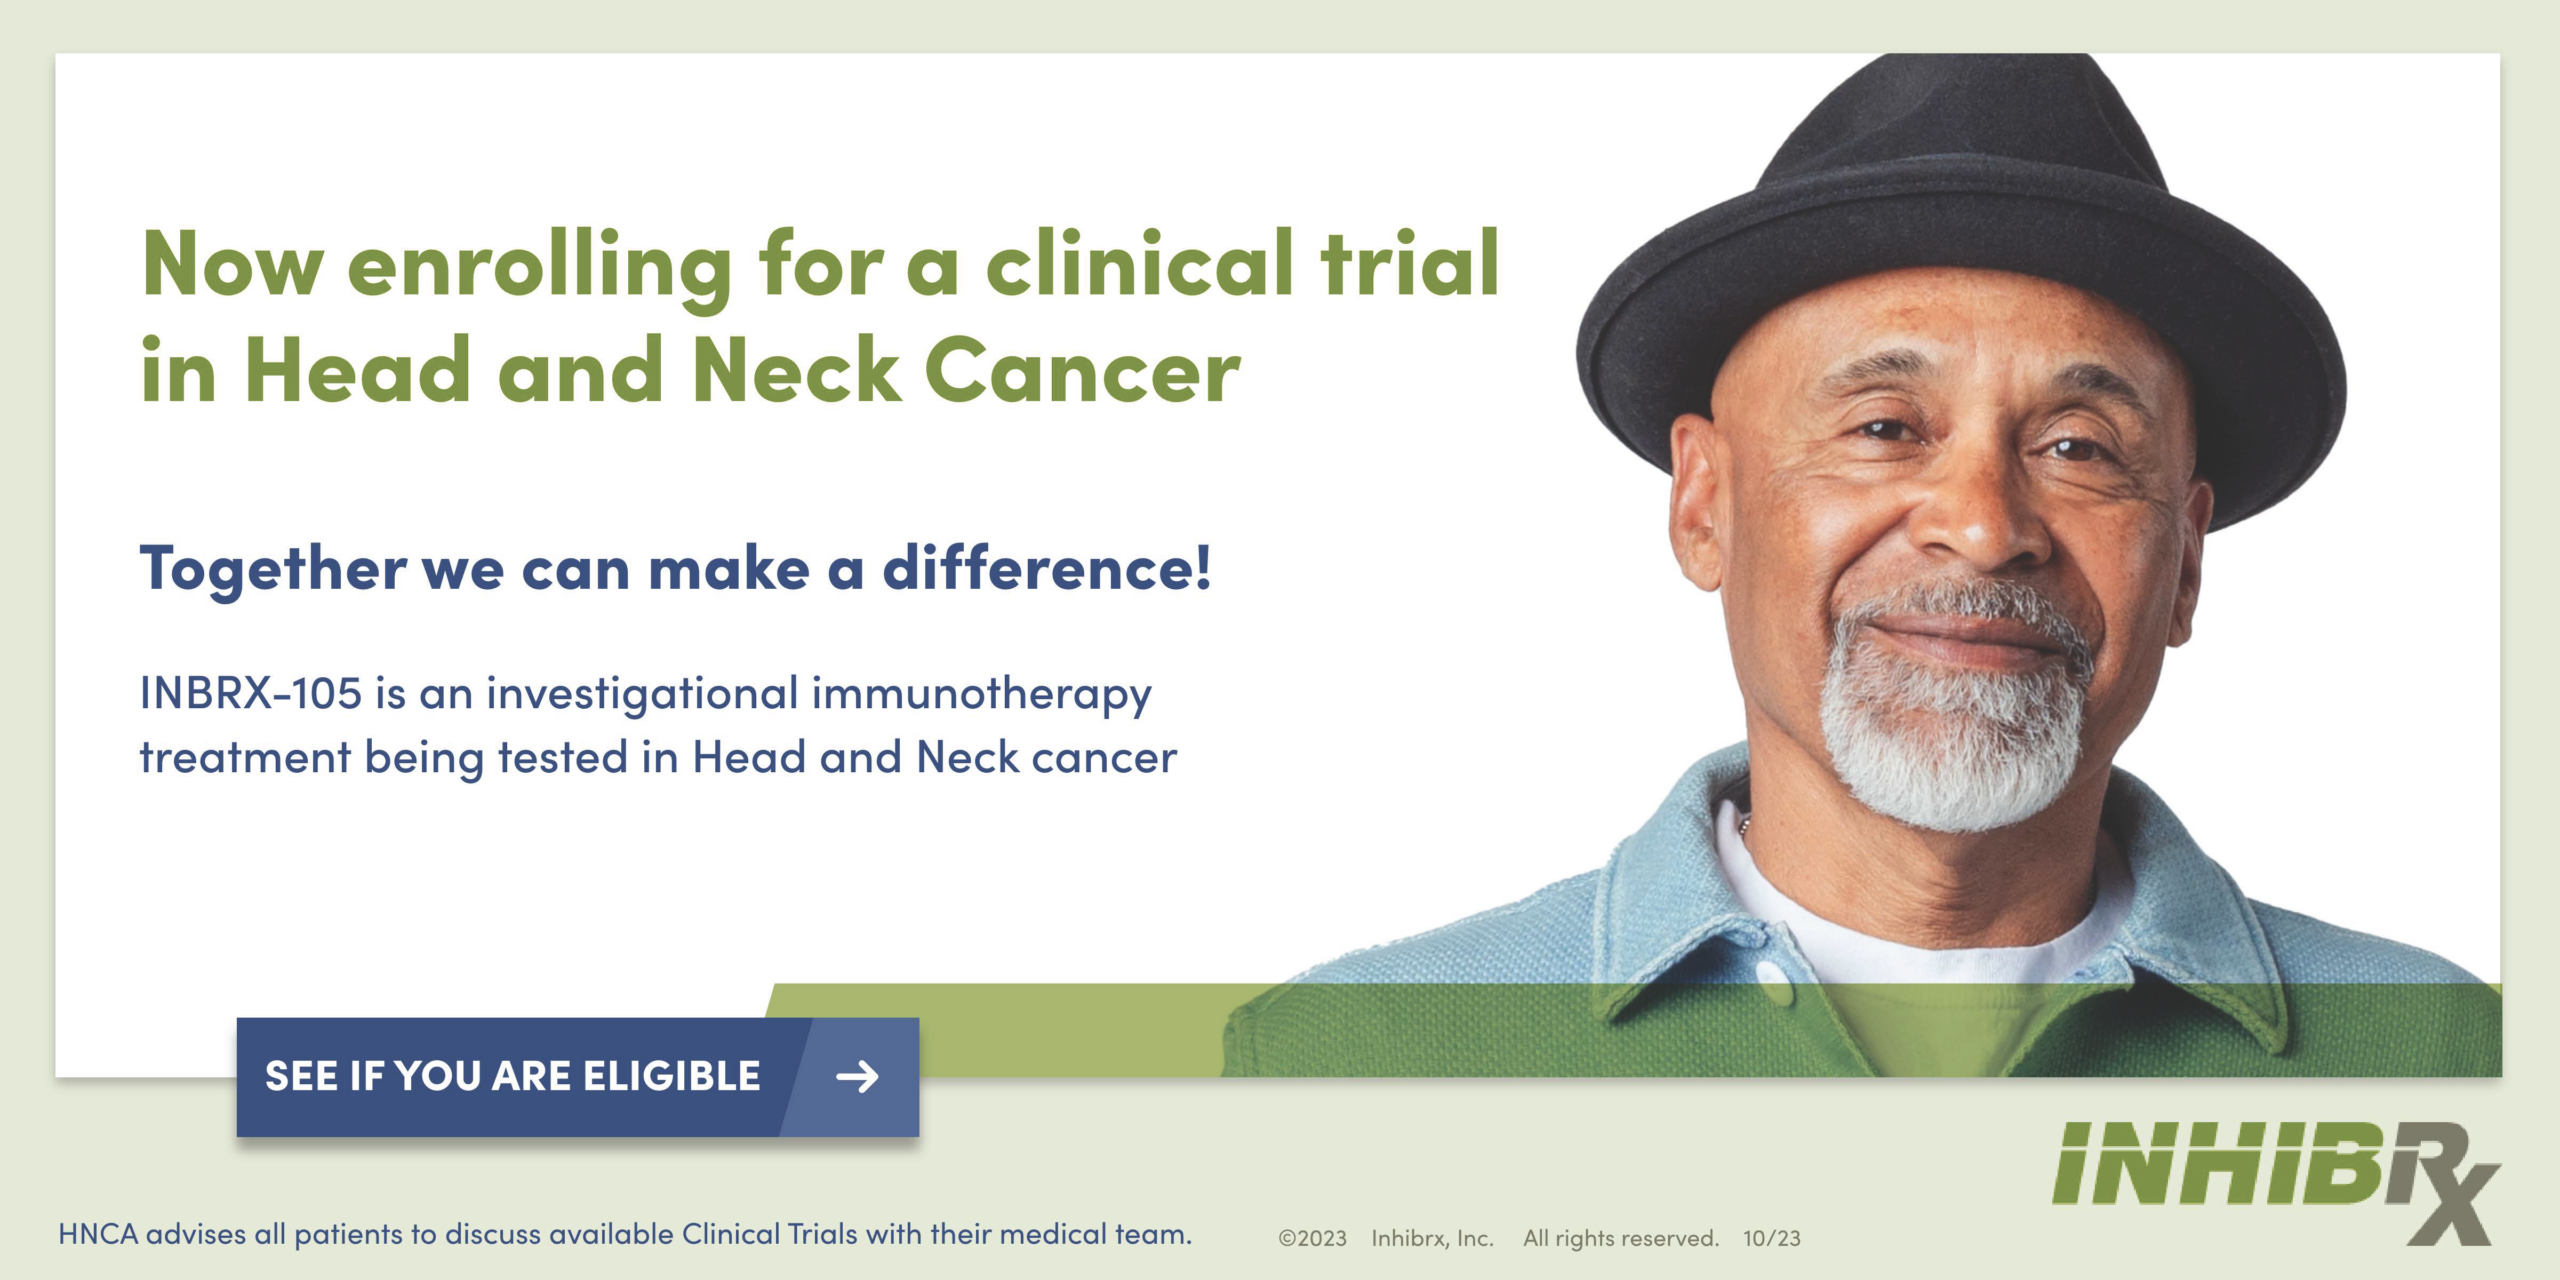 Inhibrx ad about their clinical trial